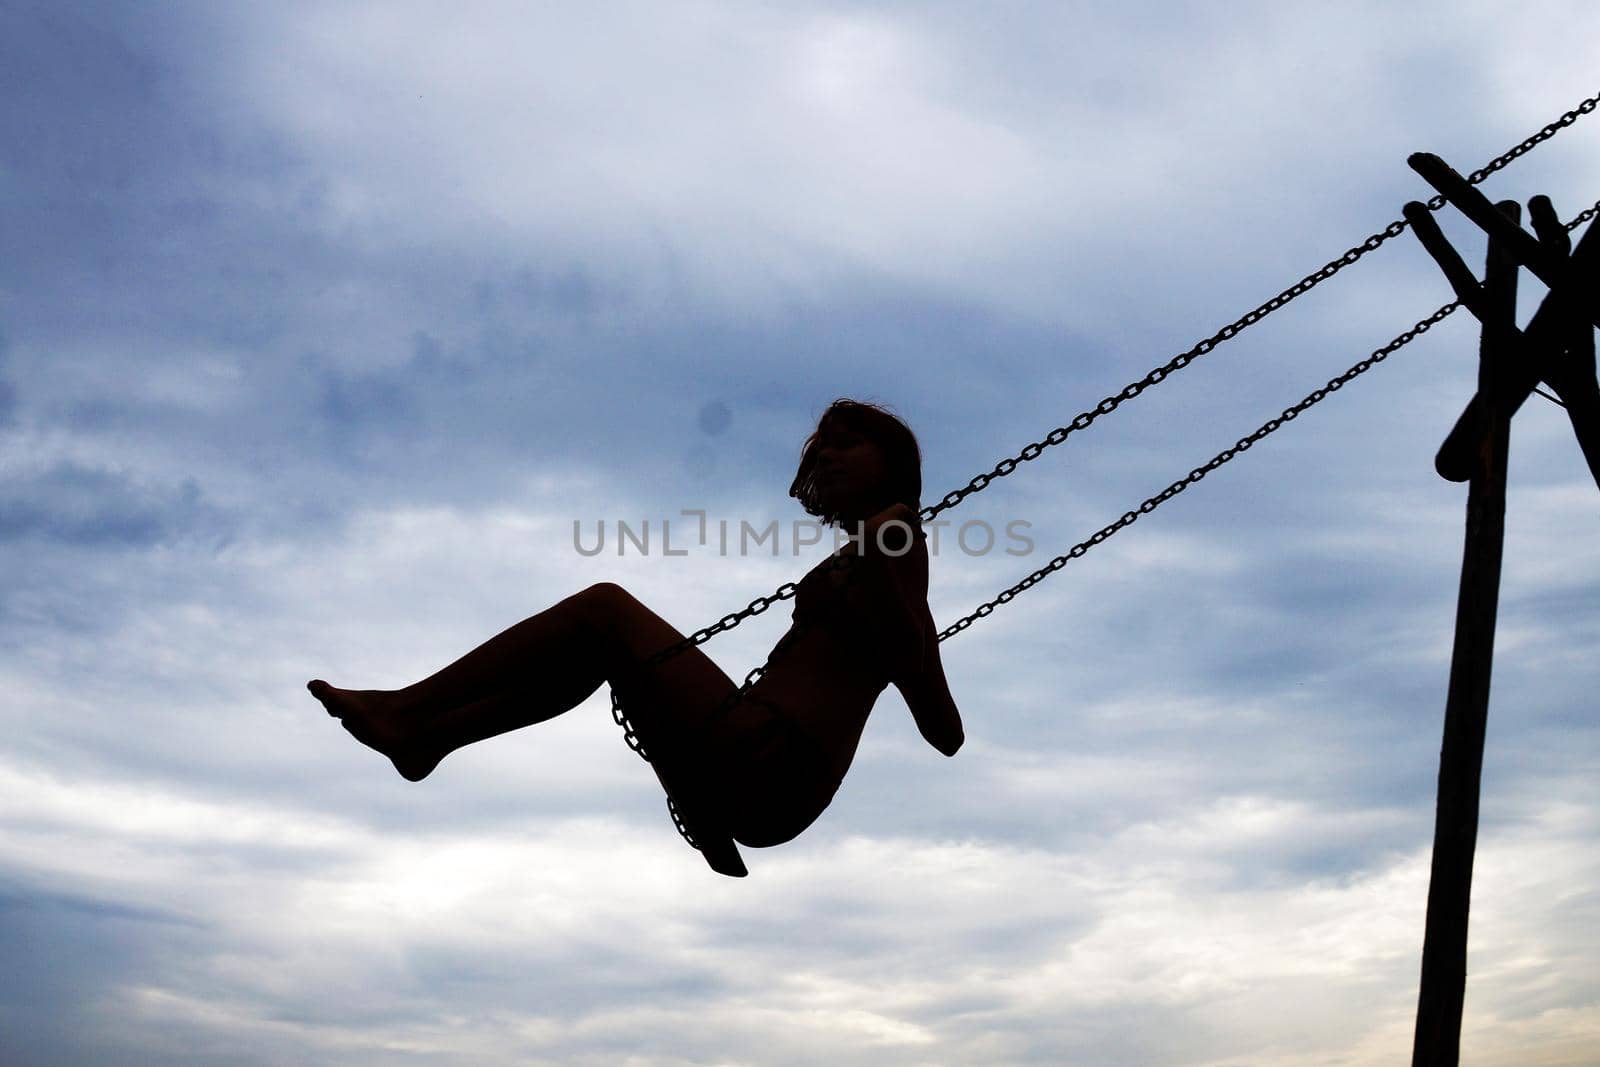 girl swinging on a swing, silhouette against a cloudy sky by Annado